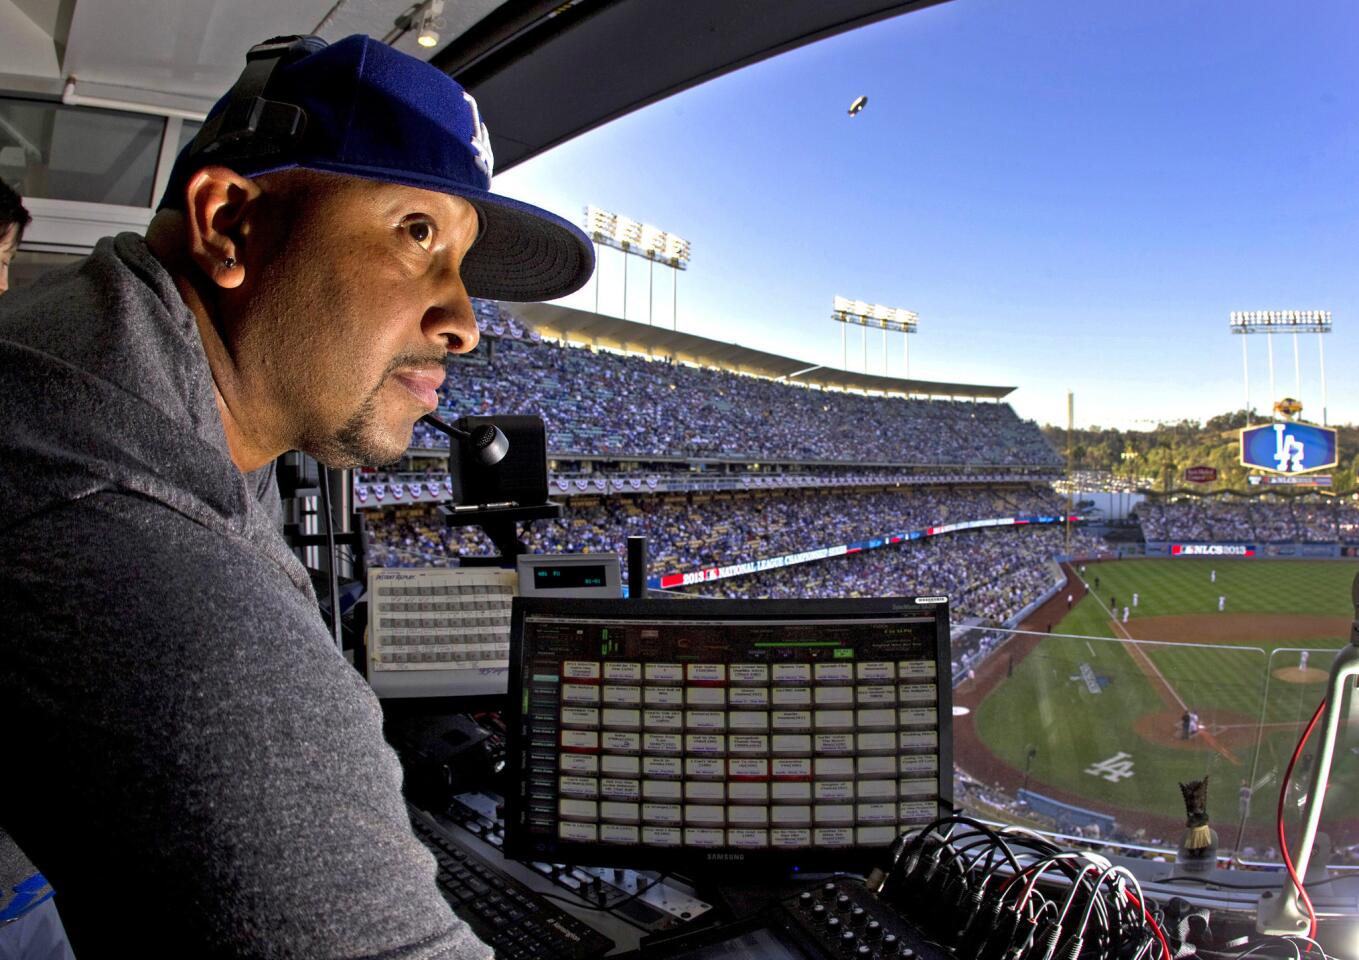 DJ Severe (Lanier Stewart) keeps the hits coming at Dodger Stadium during the Dodgers' Monday victory over the St. Louis Cardinals in Game 3 of the National League Championship Series. And yes, he takes requests -- from Dodgers players, most of whom pick the songs that play as they walk up to bat.